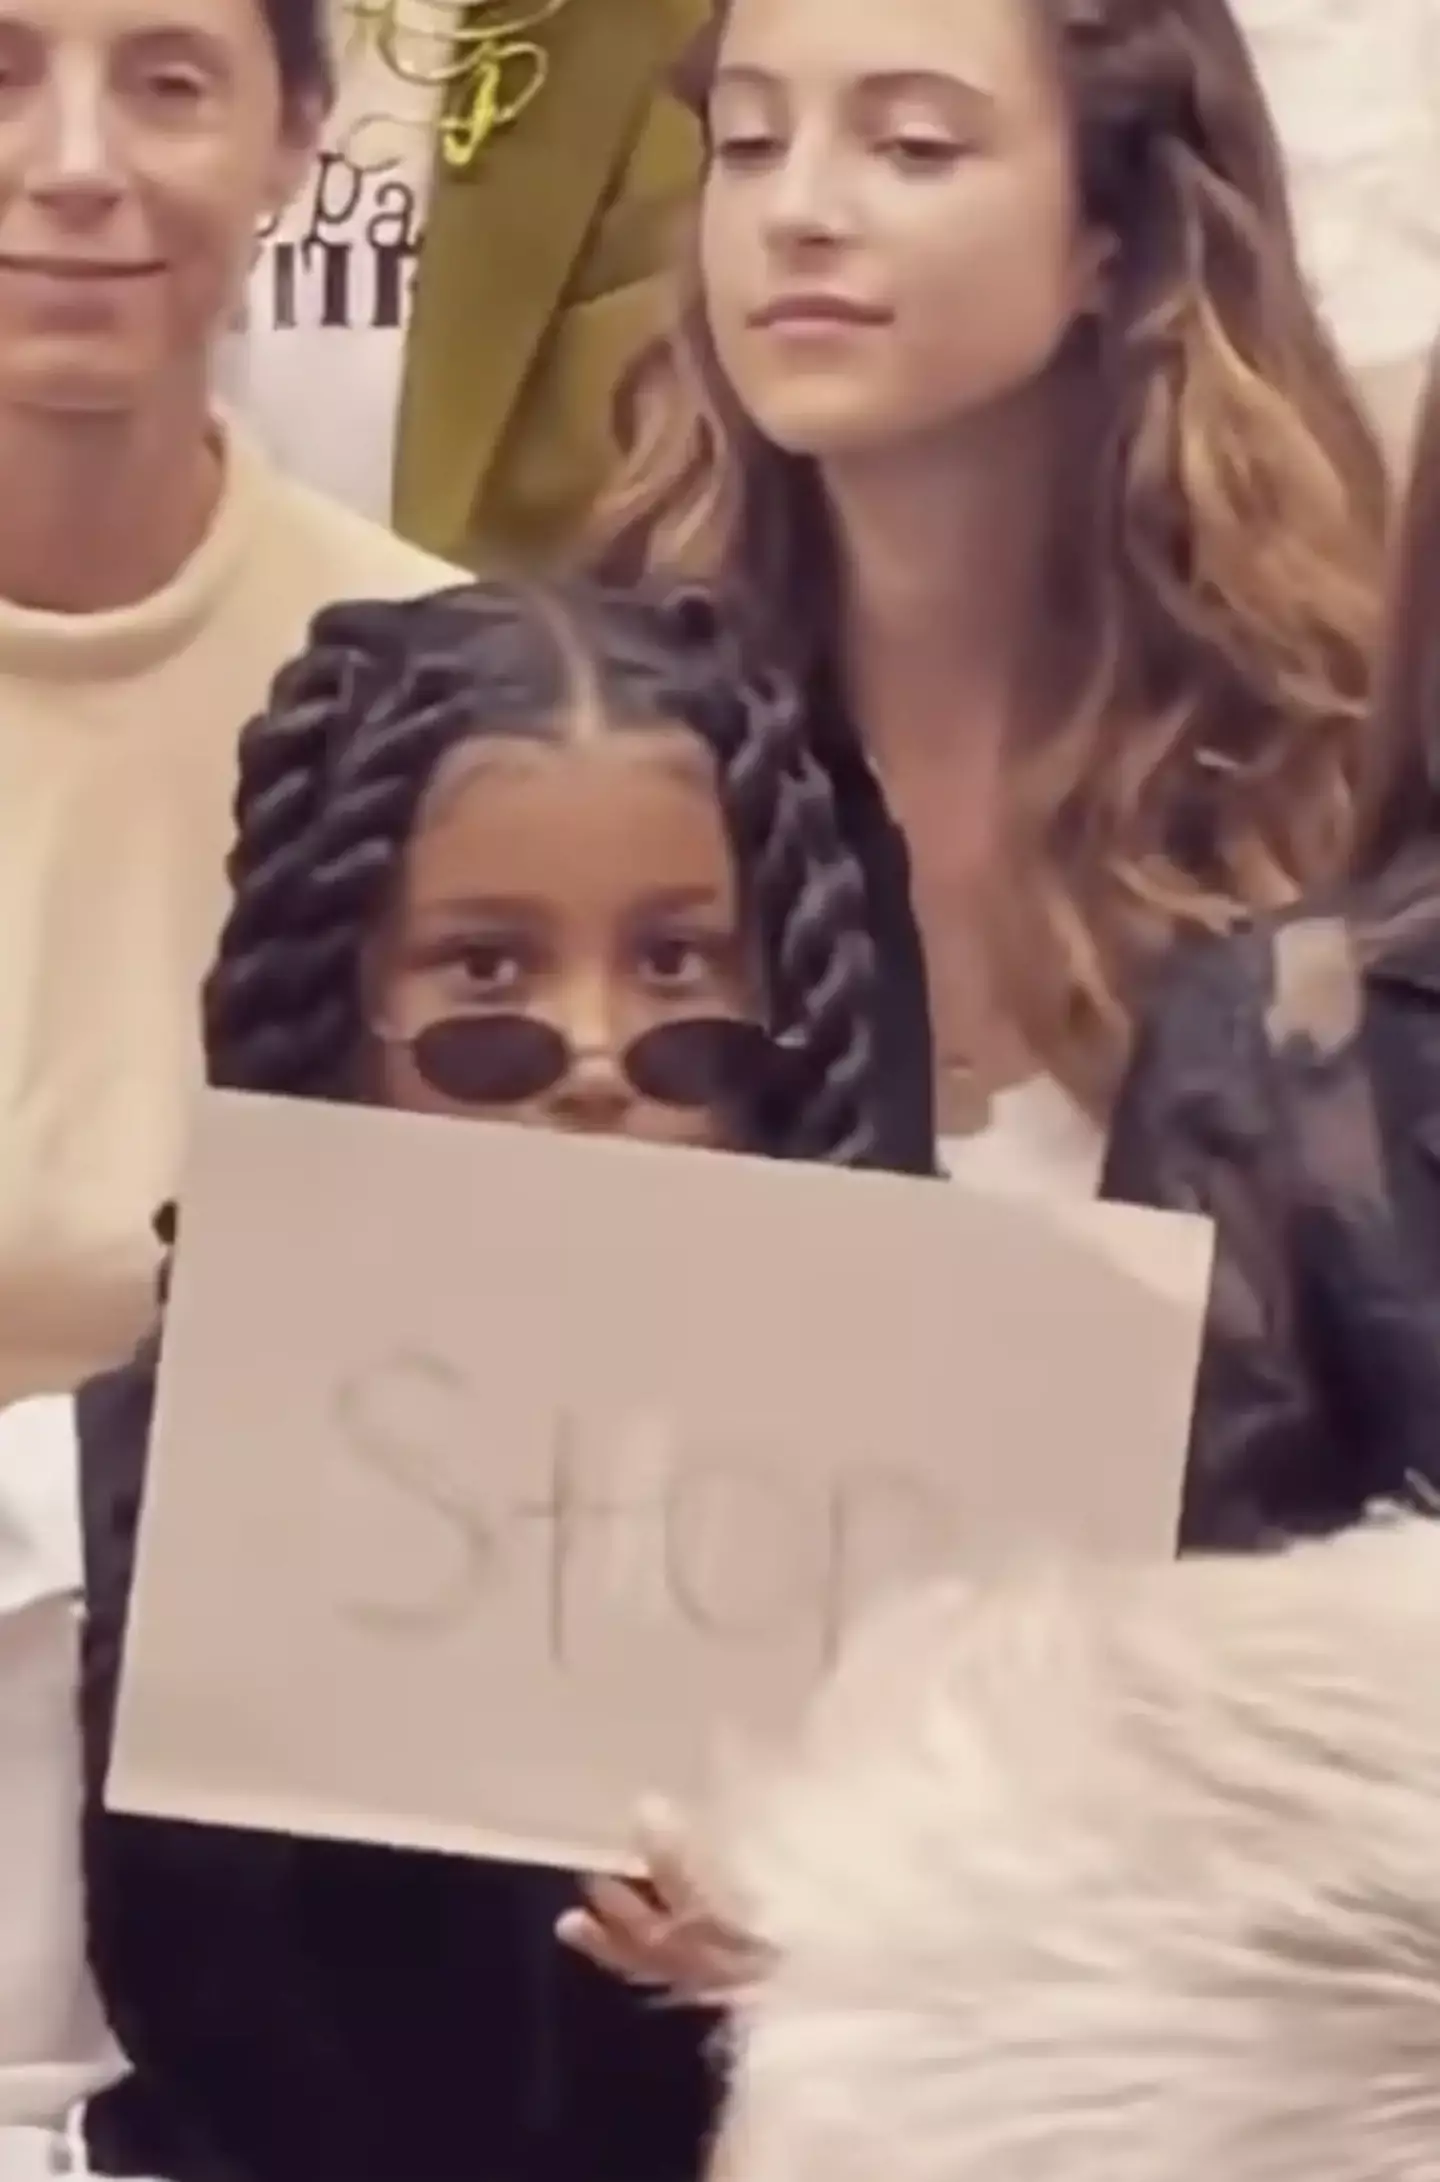 North held up a sign that read ‘stop’ at the Jean Paul Gaultier Haute Couture show.